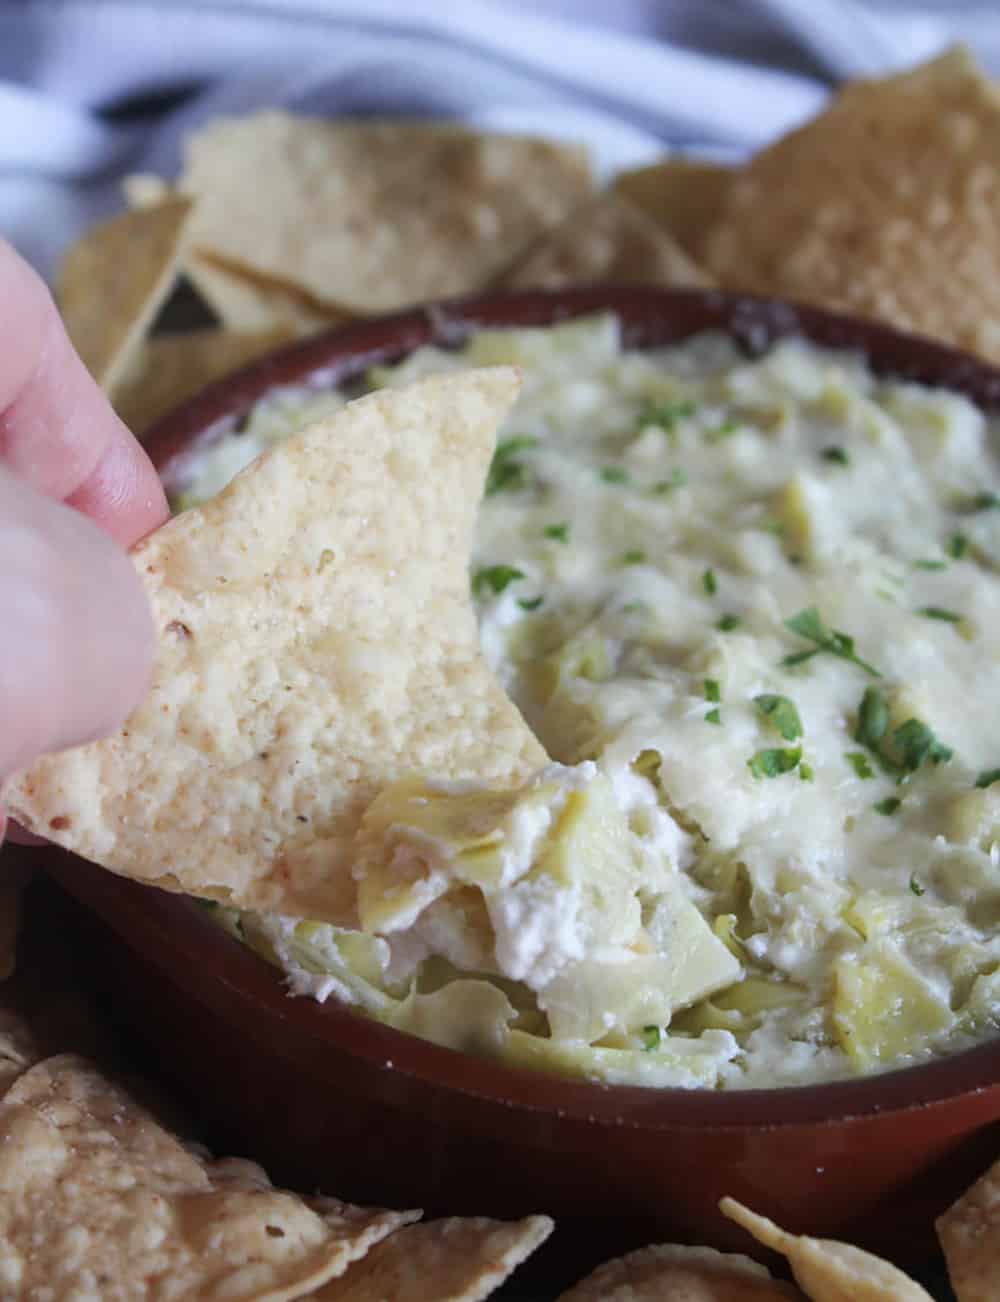 a picture of a chip dipping into the artichoke dip